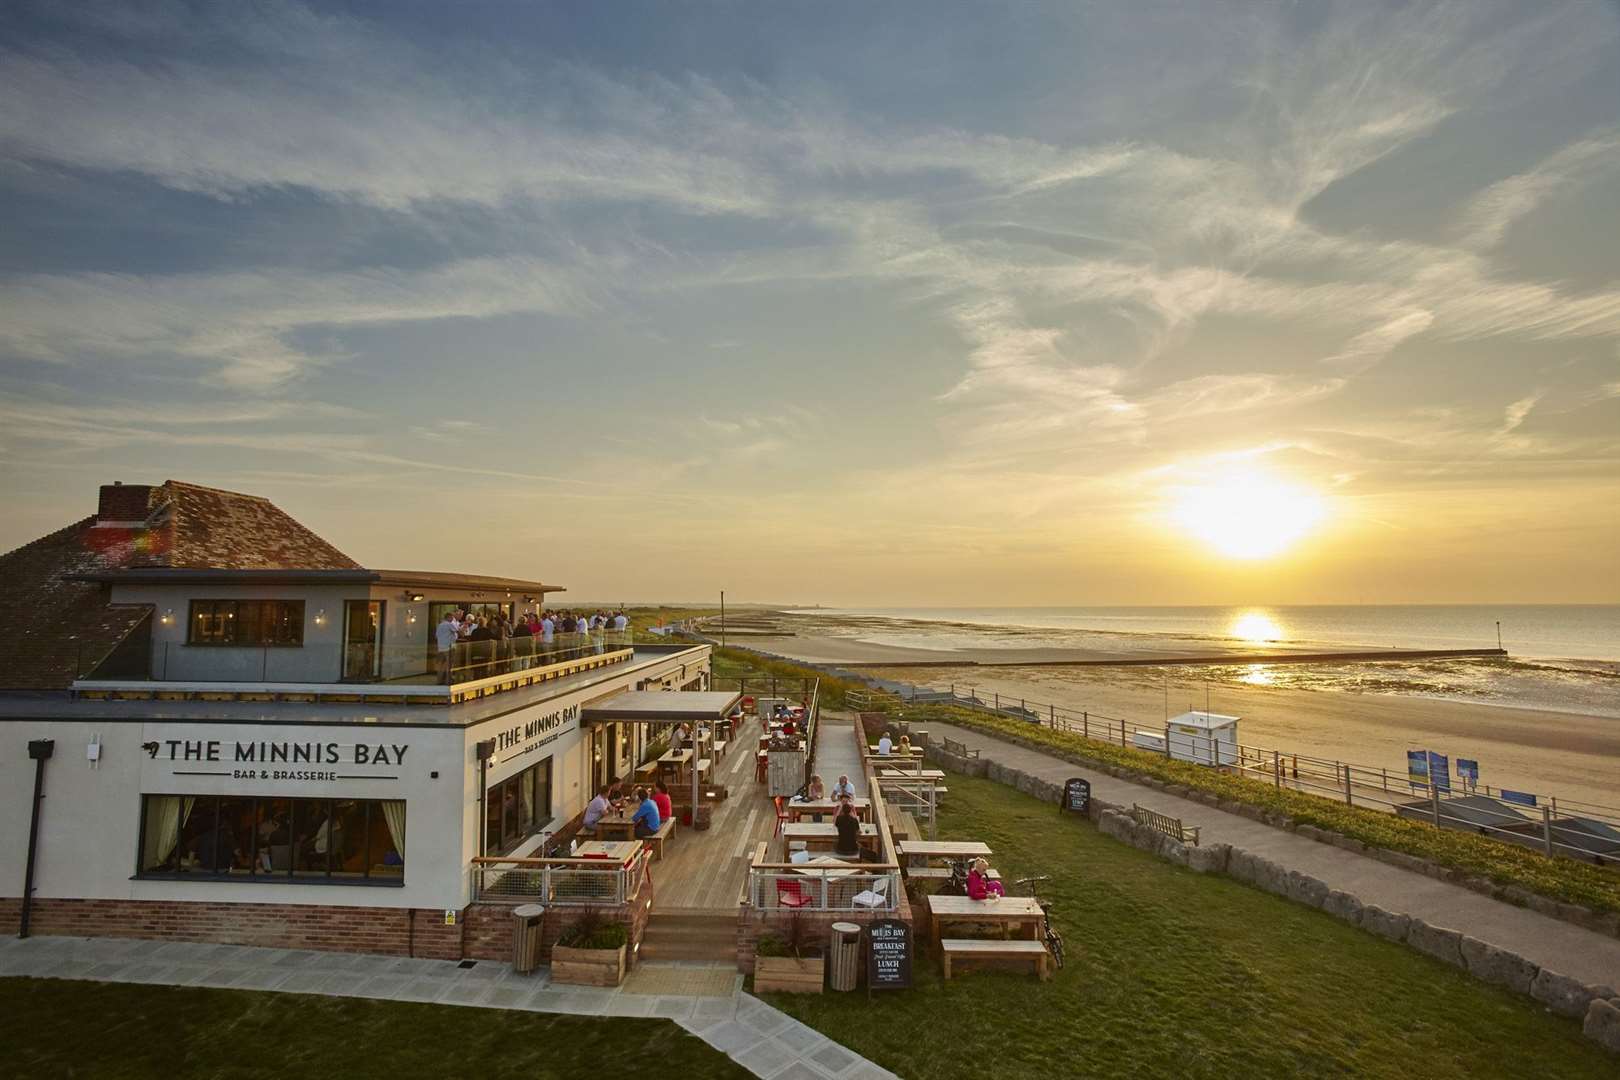 Packing the wow factor... the Minnis Bay Bar and Brasserie